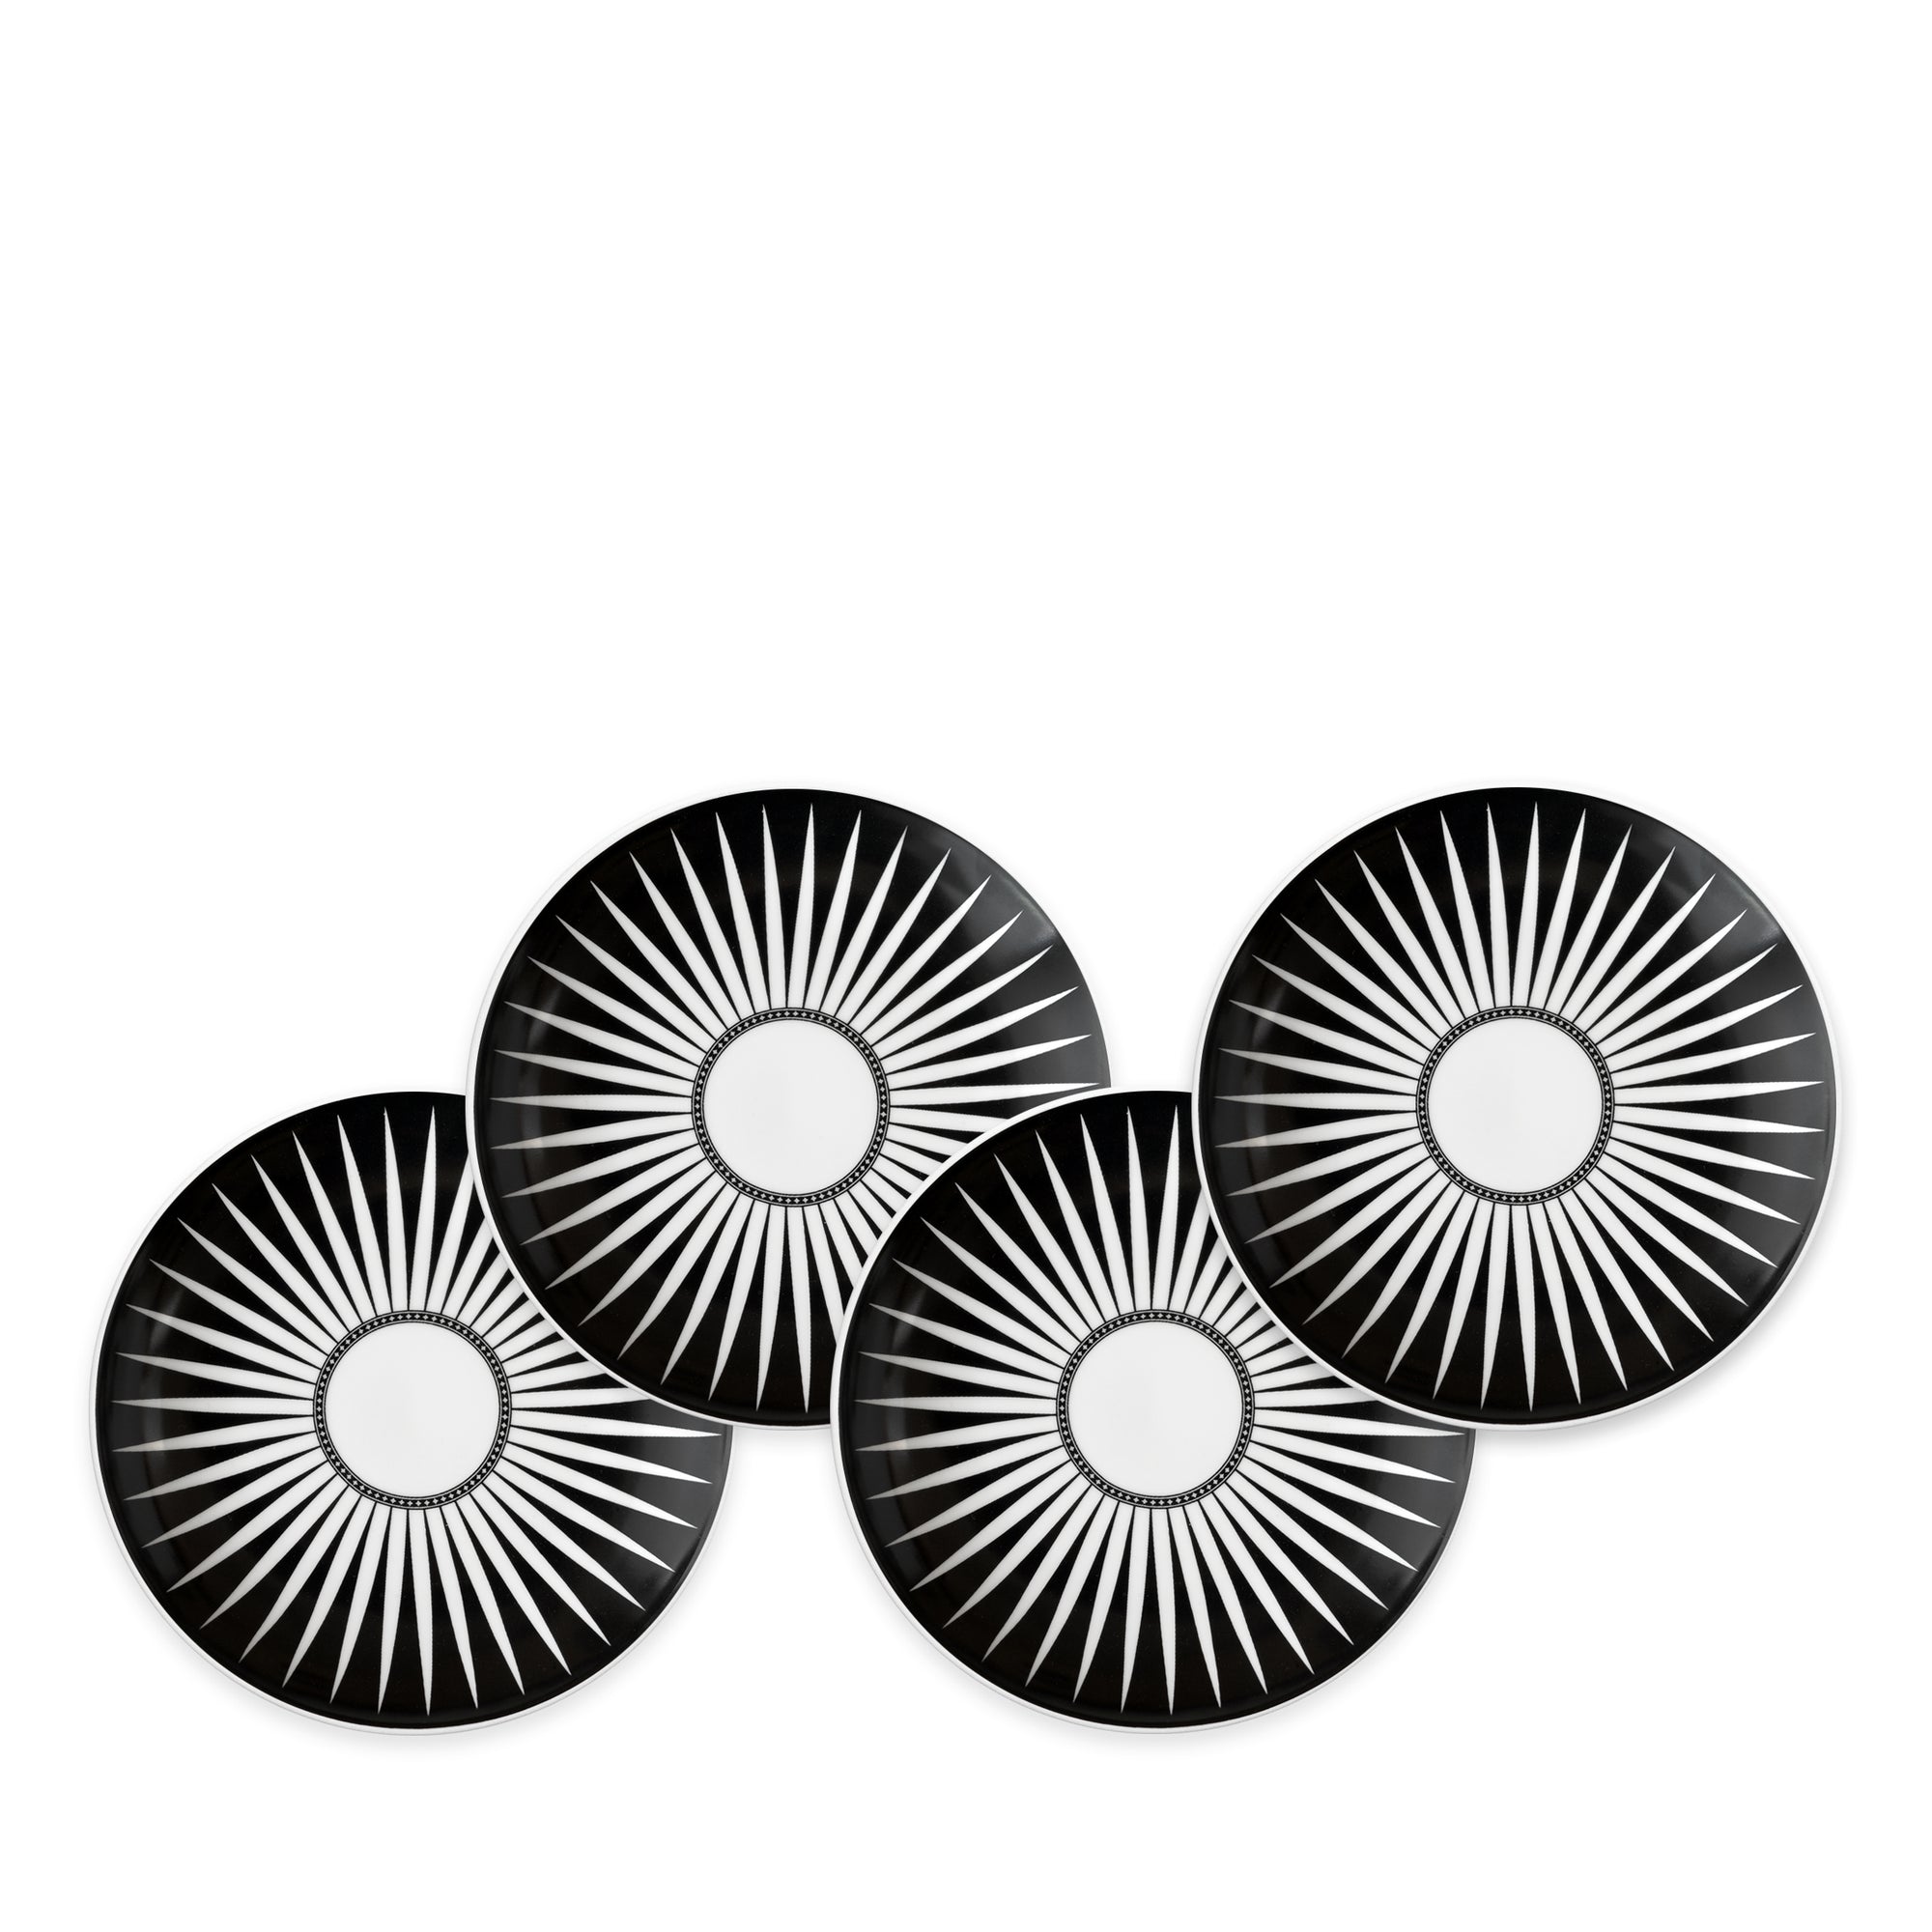 Marrakech Canapé Plates Boxed Set/4 in black and white high-fired porcelain dinnerware- Caskata